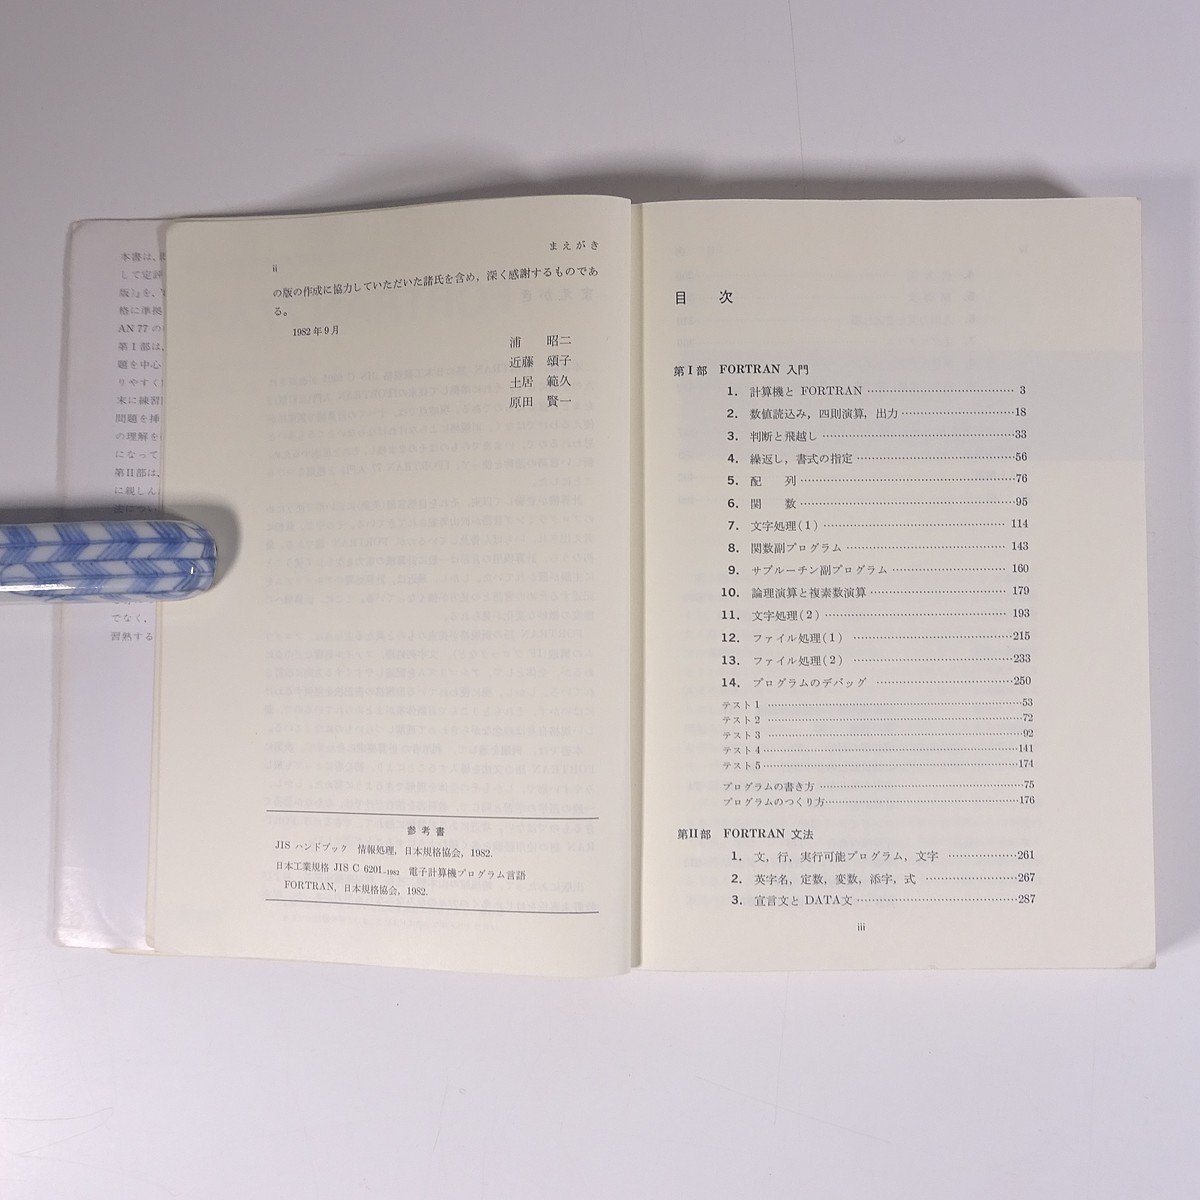 FORTRAN 77 introduction .. two compilation electron count machine. programming 8. manner pavilion 1988 separate volume PC personal computer program four tiger n* writing equipped 